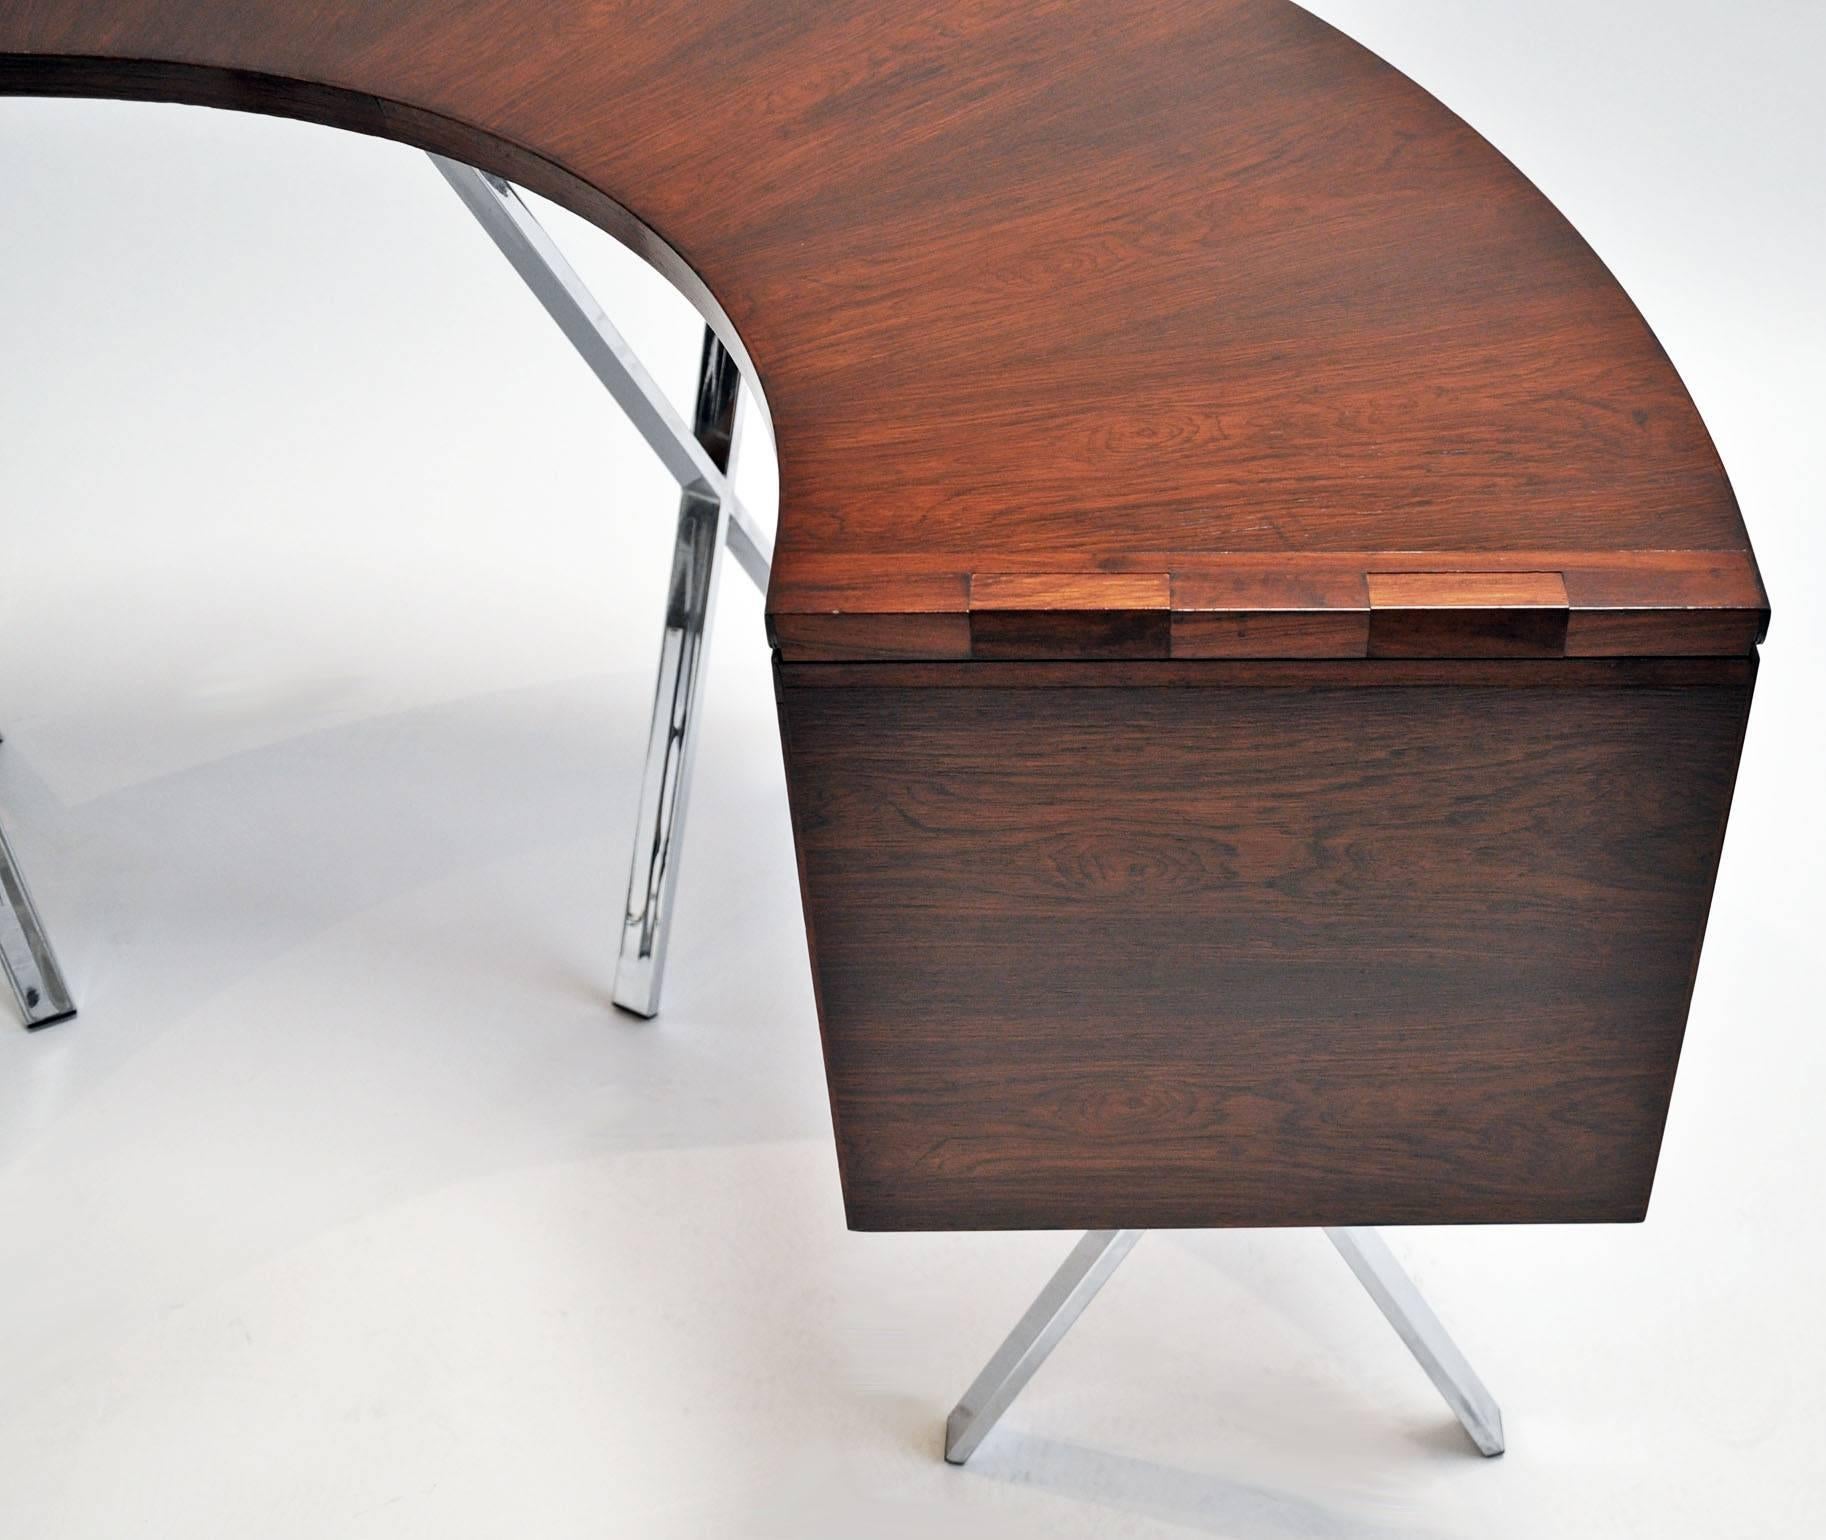 Hand-Crafted Riis Antonsen Drop-Leaf Table, 1965